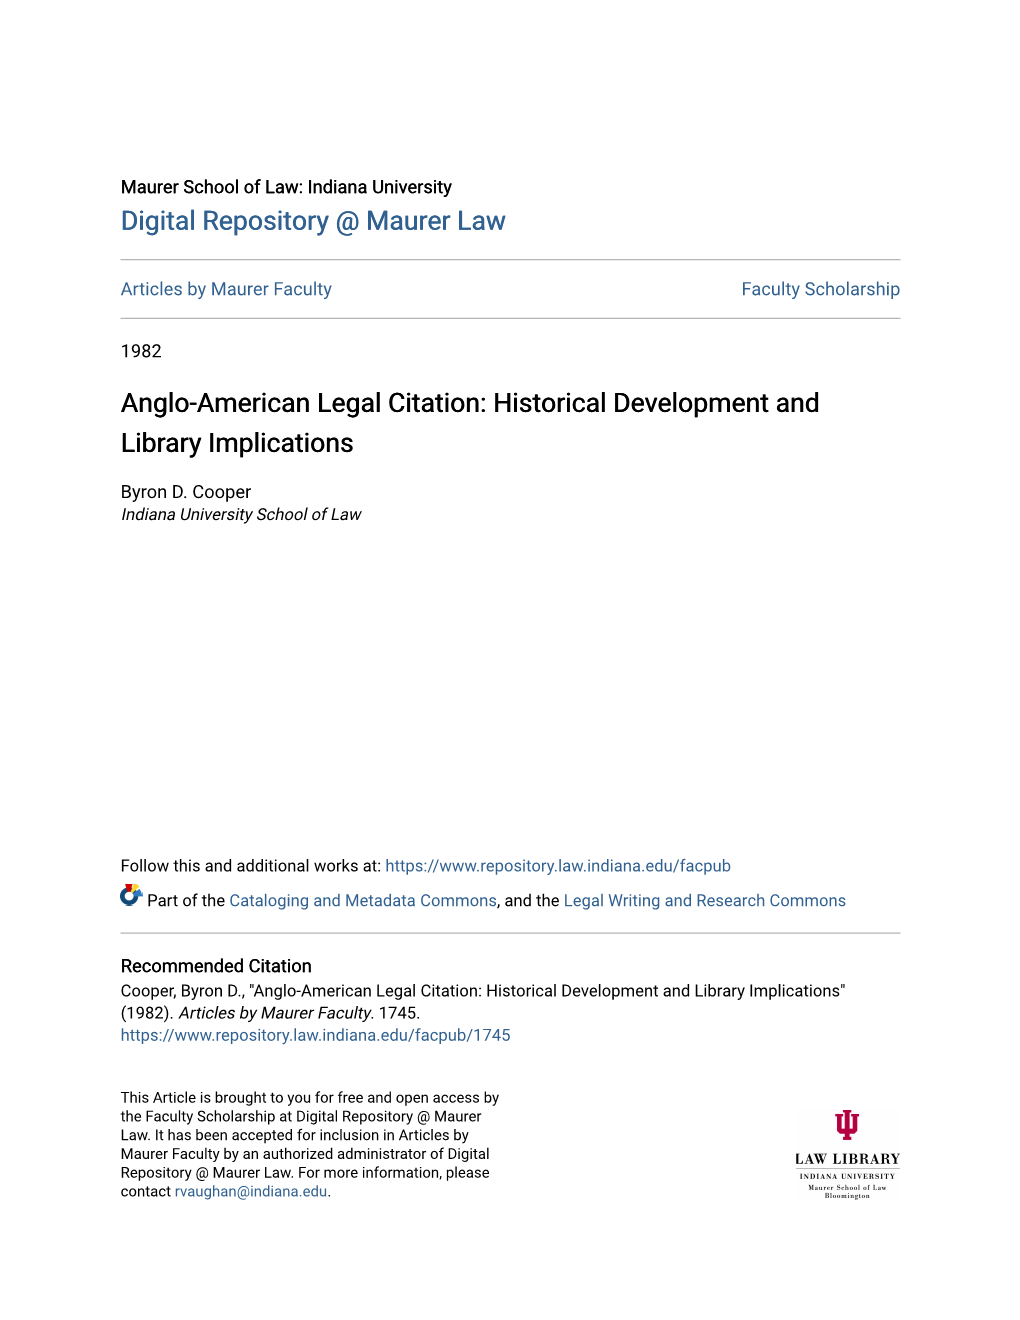 Anglo-American Legal Citation: Historical Development and Library Implications